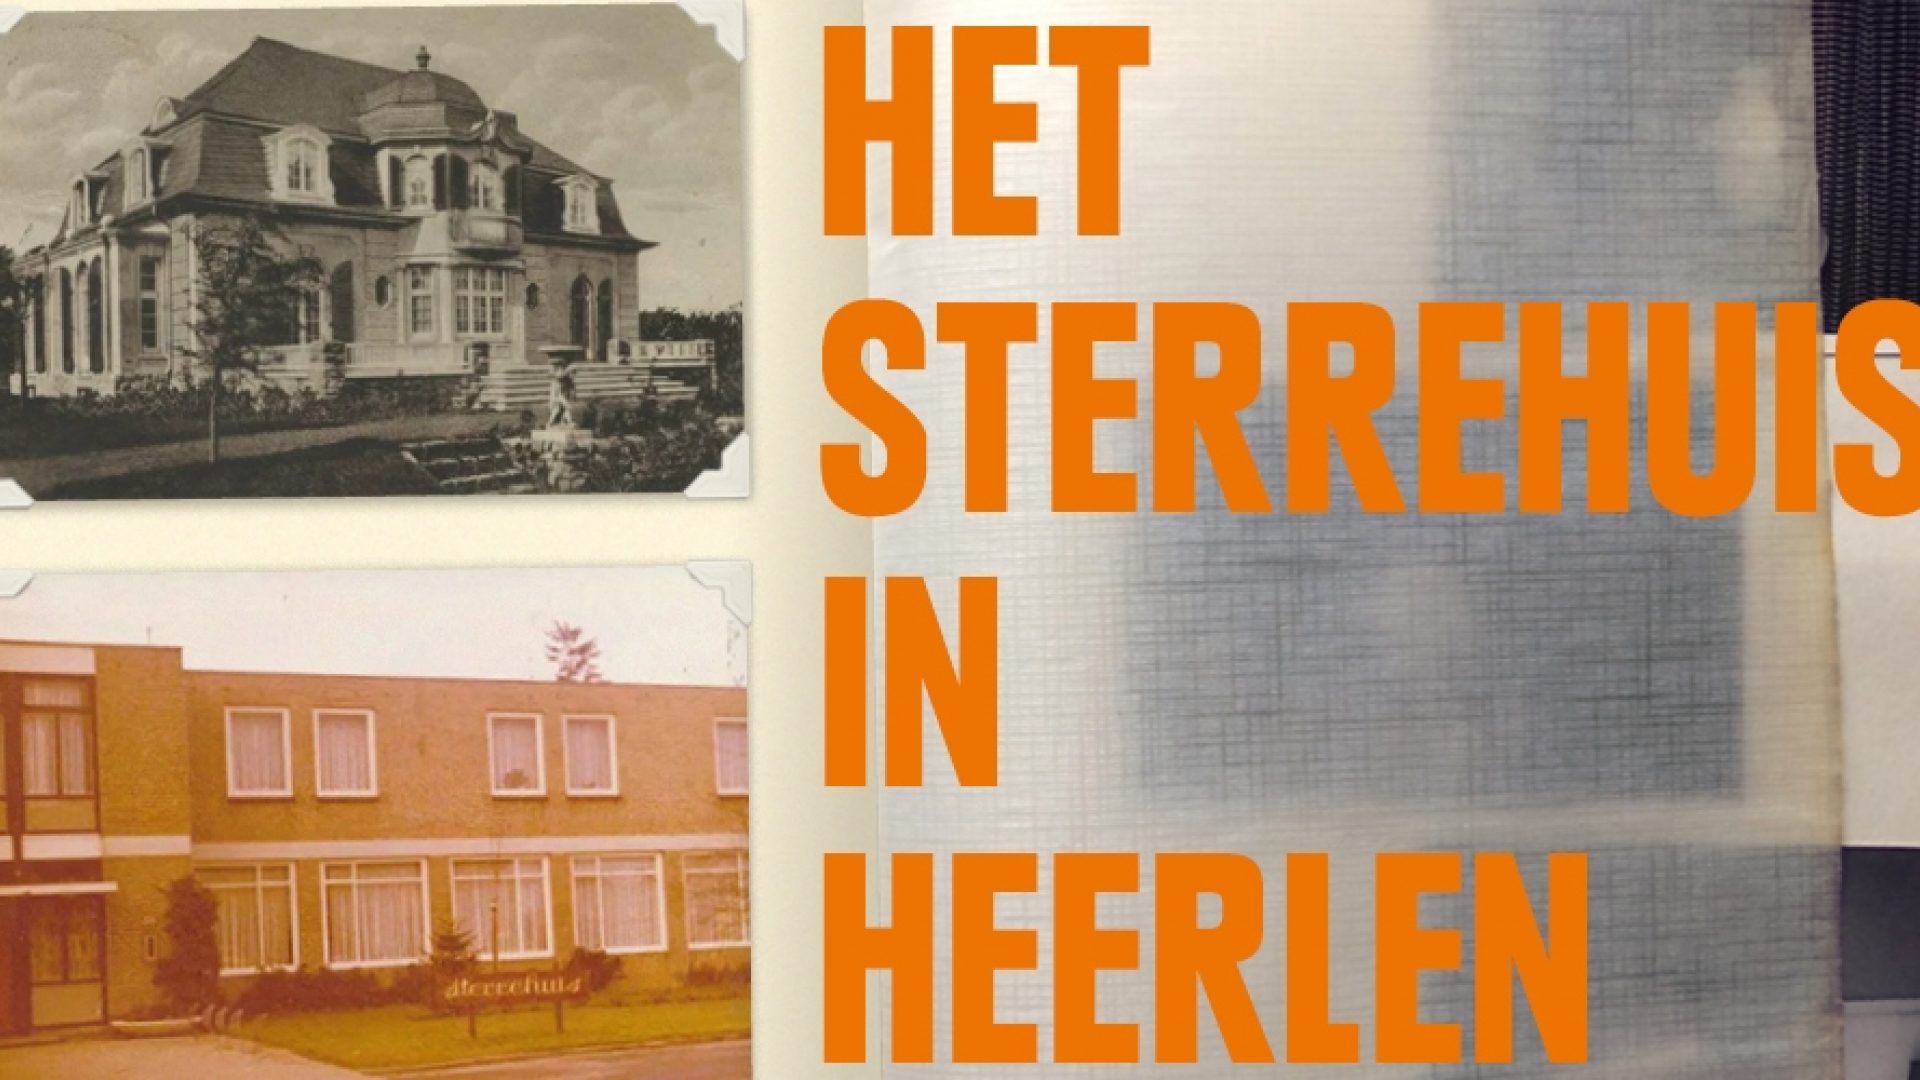 Het Sterrehuis (try-out)